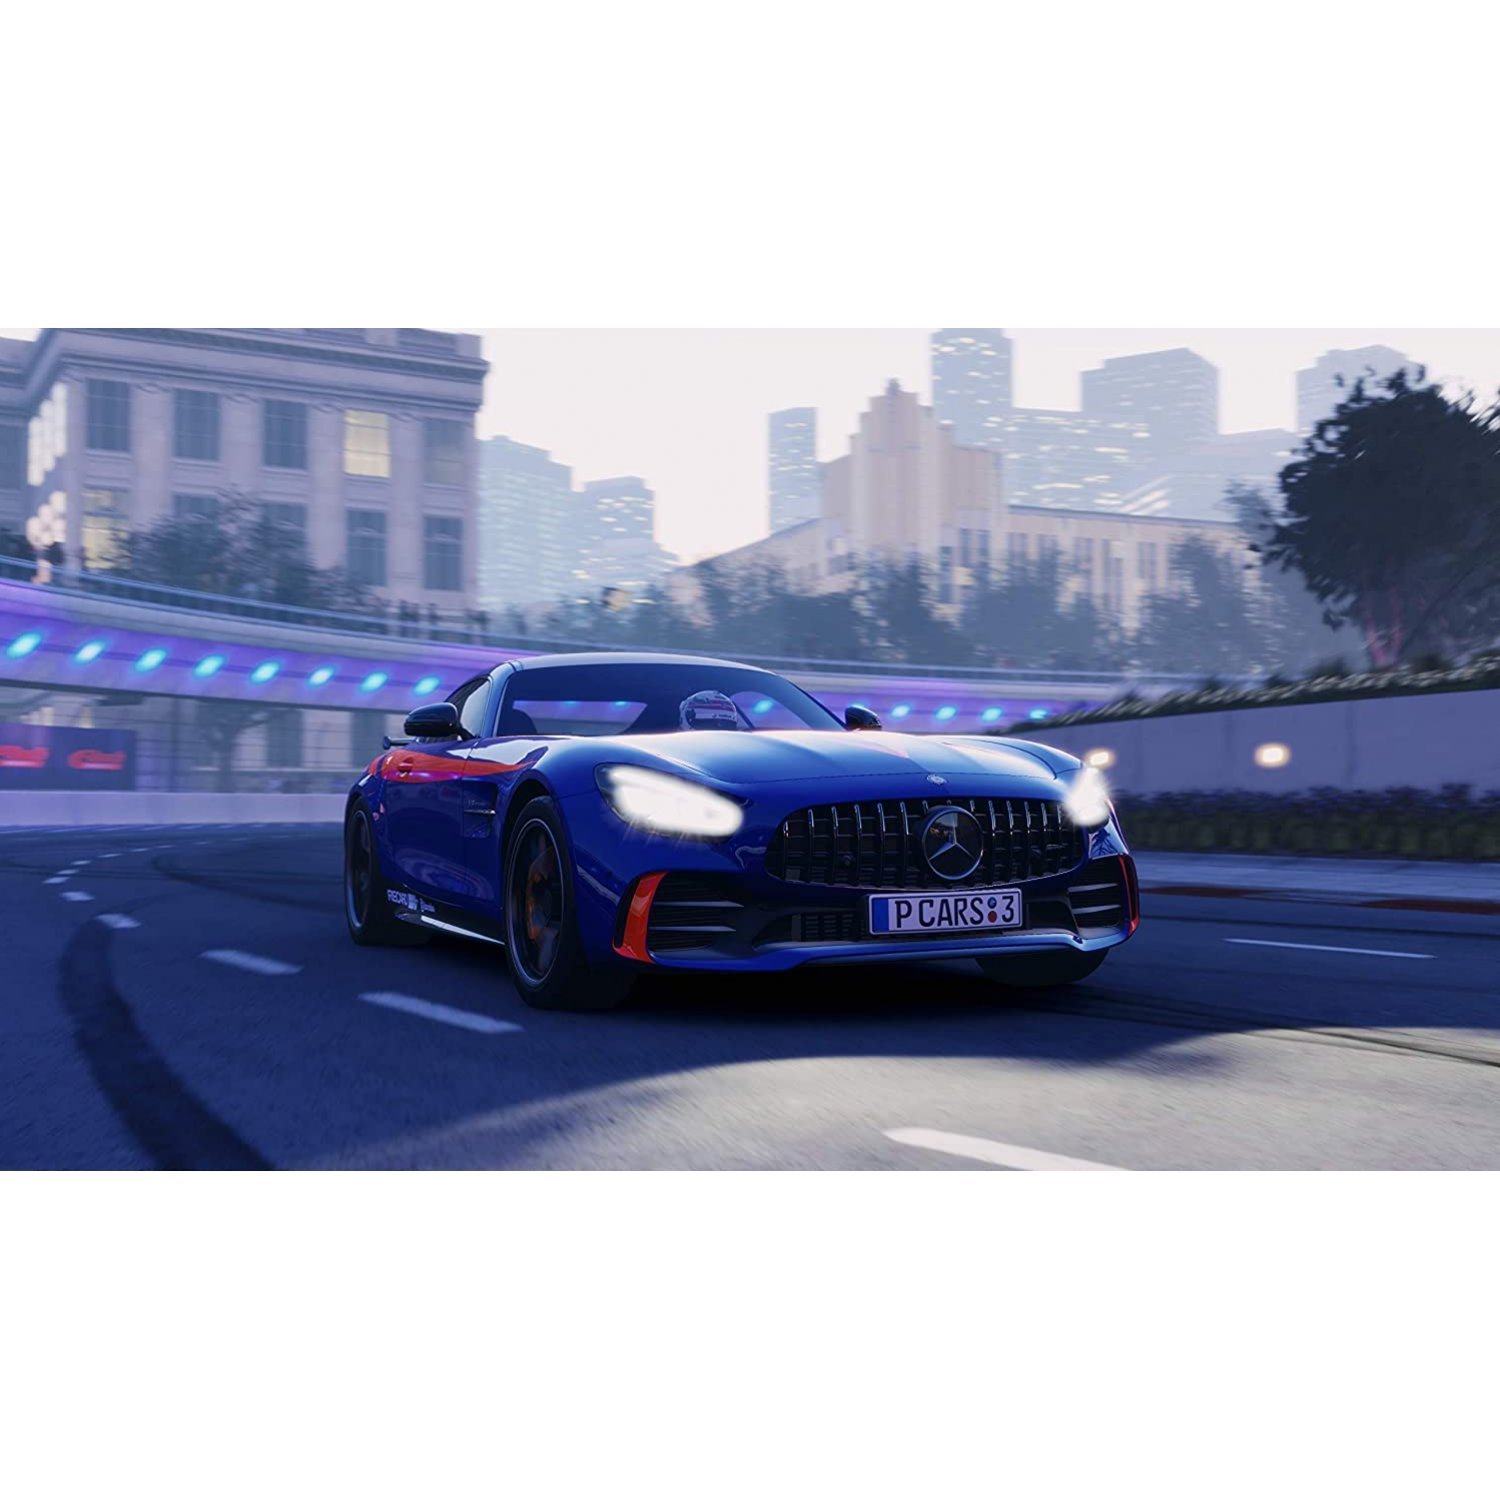 Project CARS 3, Project CAR III, Project Cars 3, PS4, Playstation 4, XONE, Xbox One, Europe, North America, US, Asia, Japan, release date, features, price, pre-order now, trailer, Screenshots, Bandai Namco, Codemasters, Slightly Mad Studios, Project CARS 2020